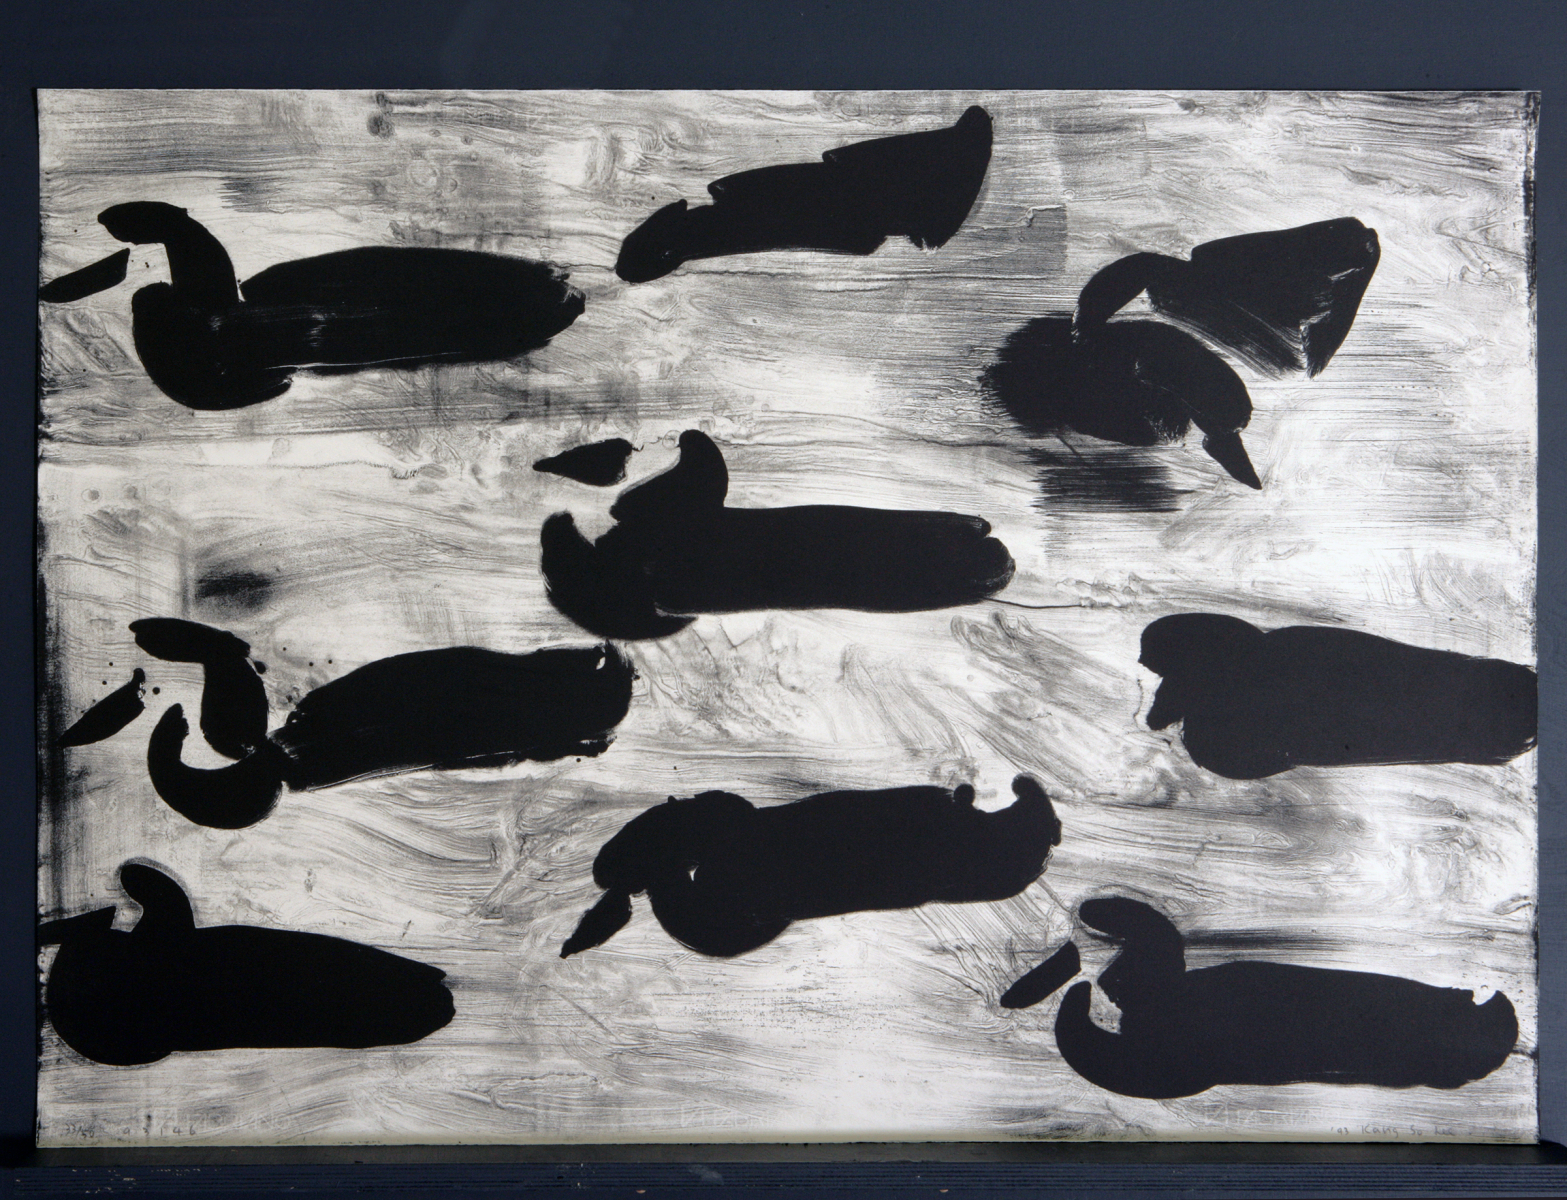 Untitled-93146, 1993, Lithography, 70x100cm